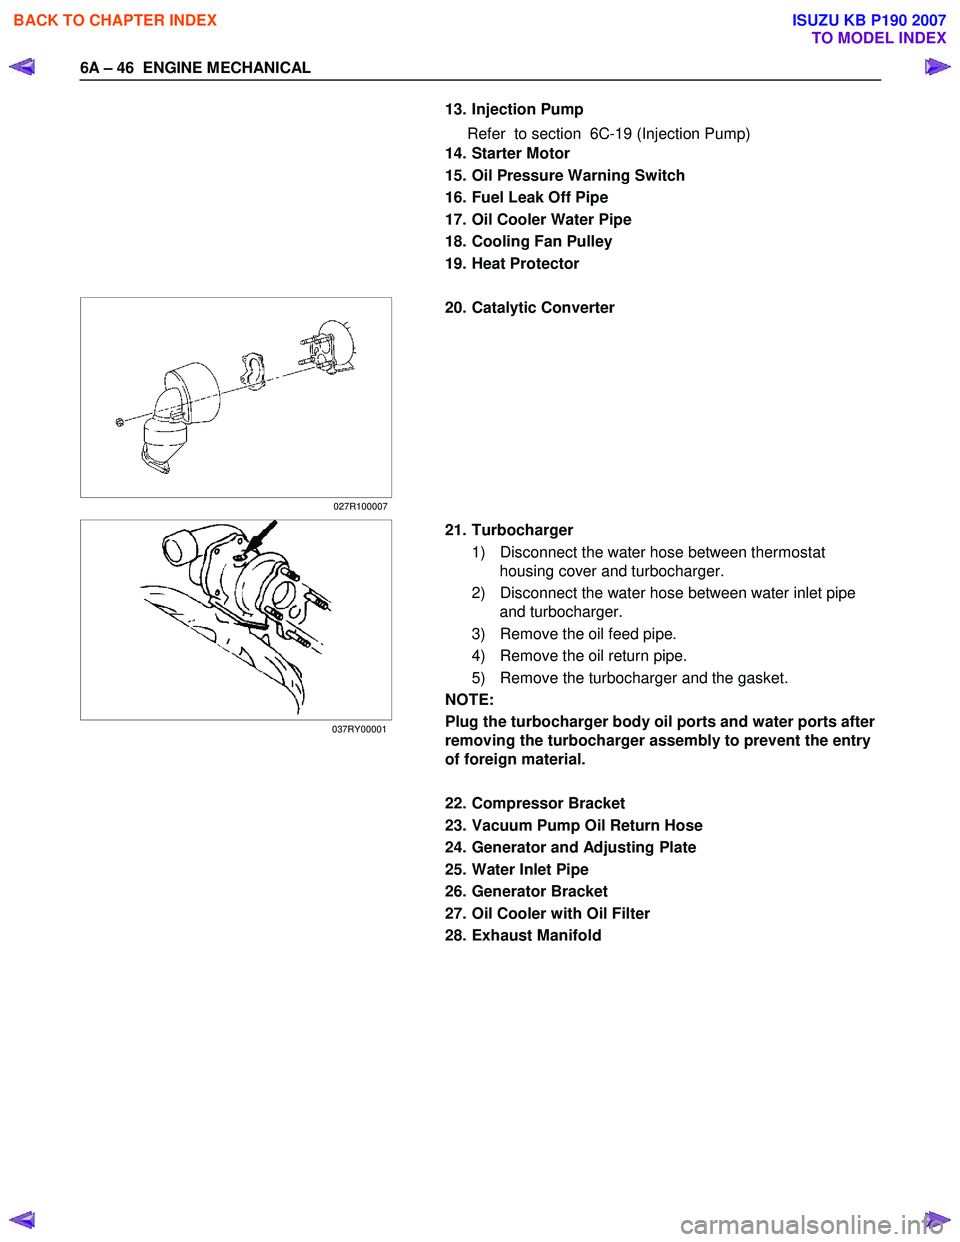 ISUZU KB P190 2007  Workshop Repair Manual 6A – 46  ENGINE MECHANICAL 
  13. Injection Pump  
  Refer  to section  6C-19 (Injection Pump) 
 
 14. Starter Motor 
  15. Oil Pressure Warning Switch 
  16. Fuel Leak Off Pipe 
  17. Oil Cooler Wa